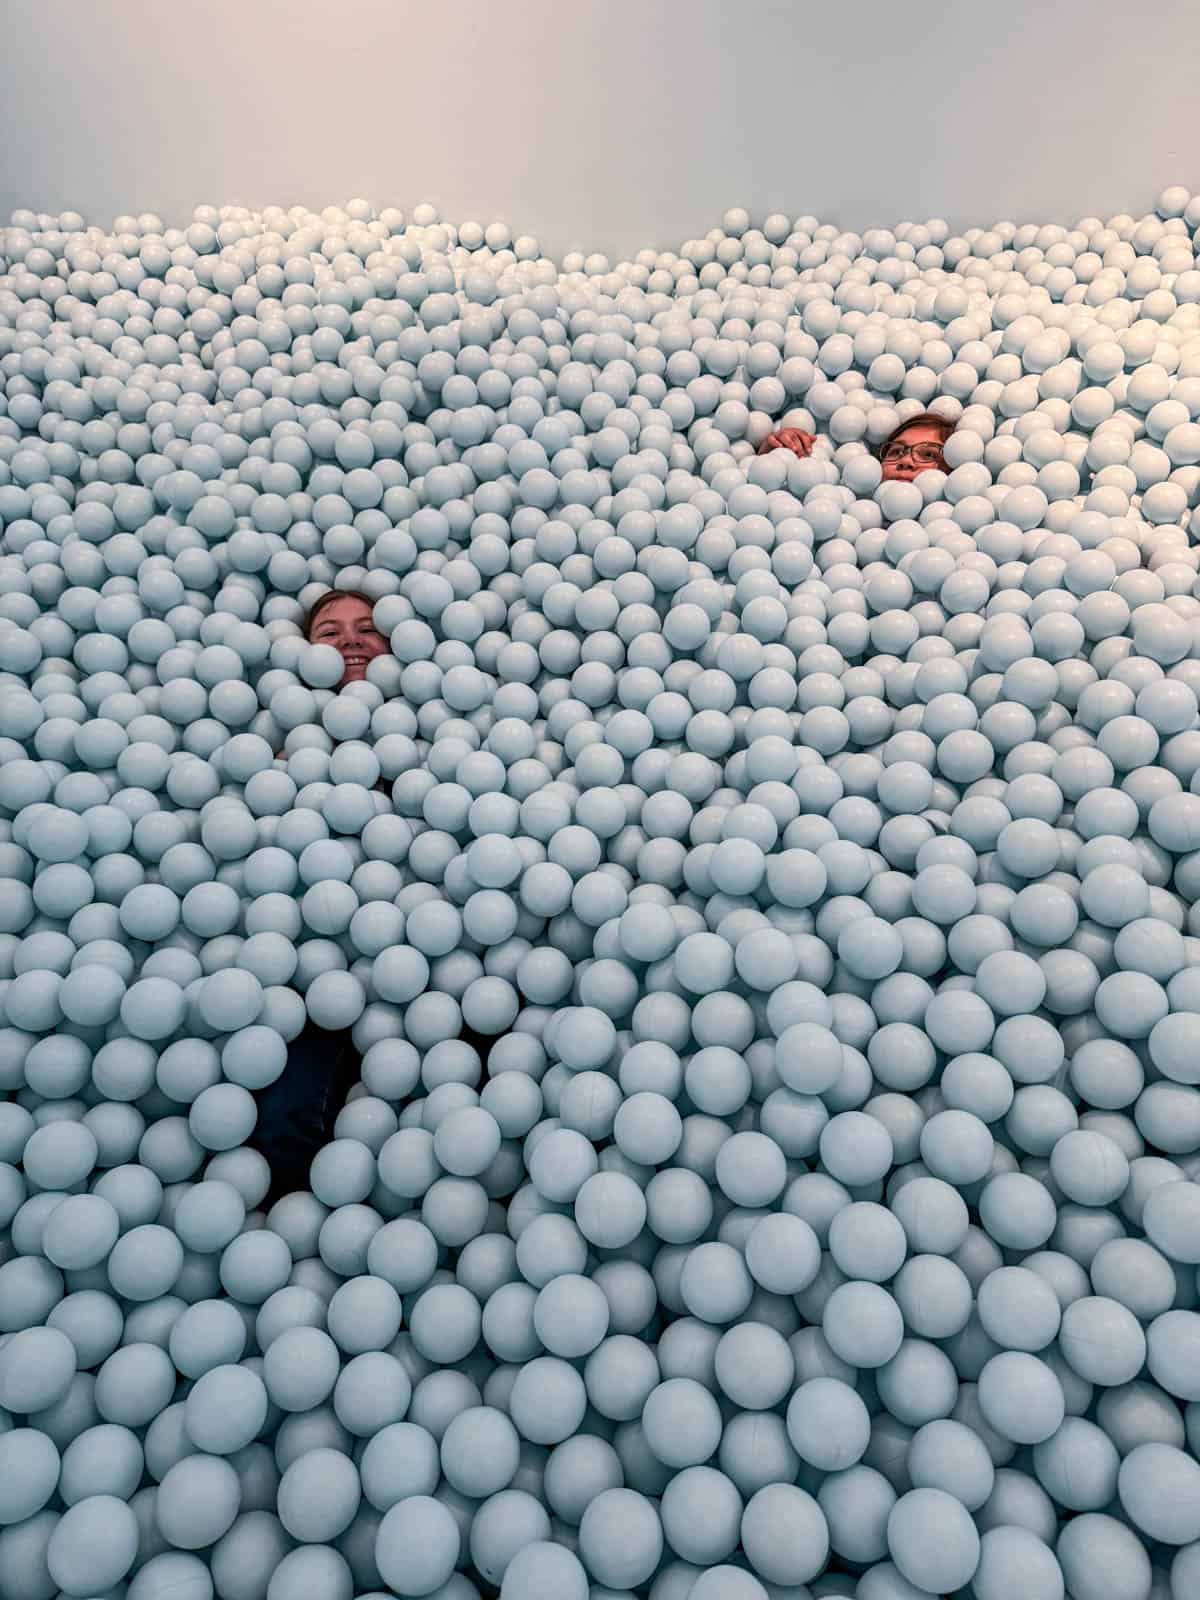 Kids buried in a ball pit.